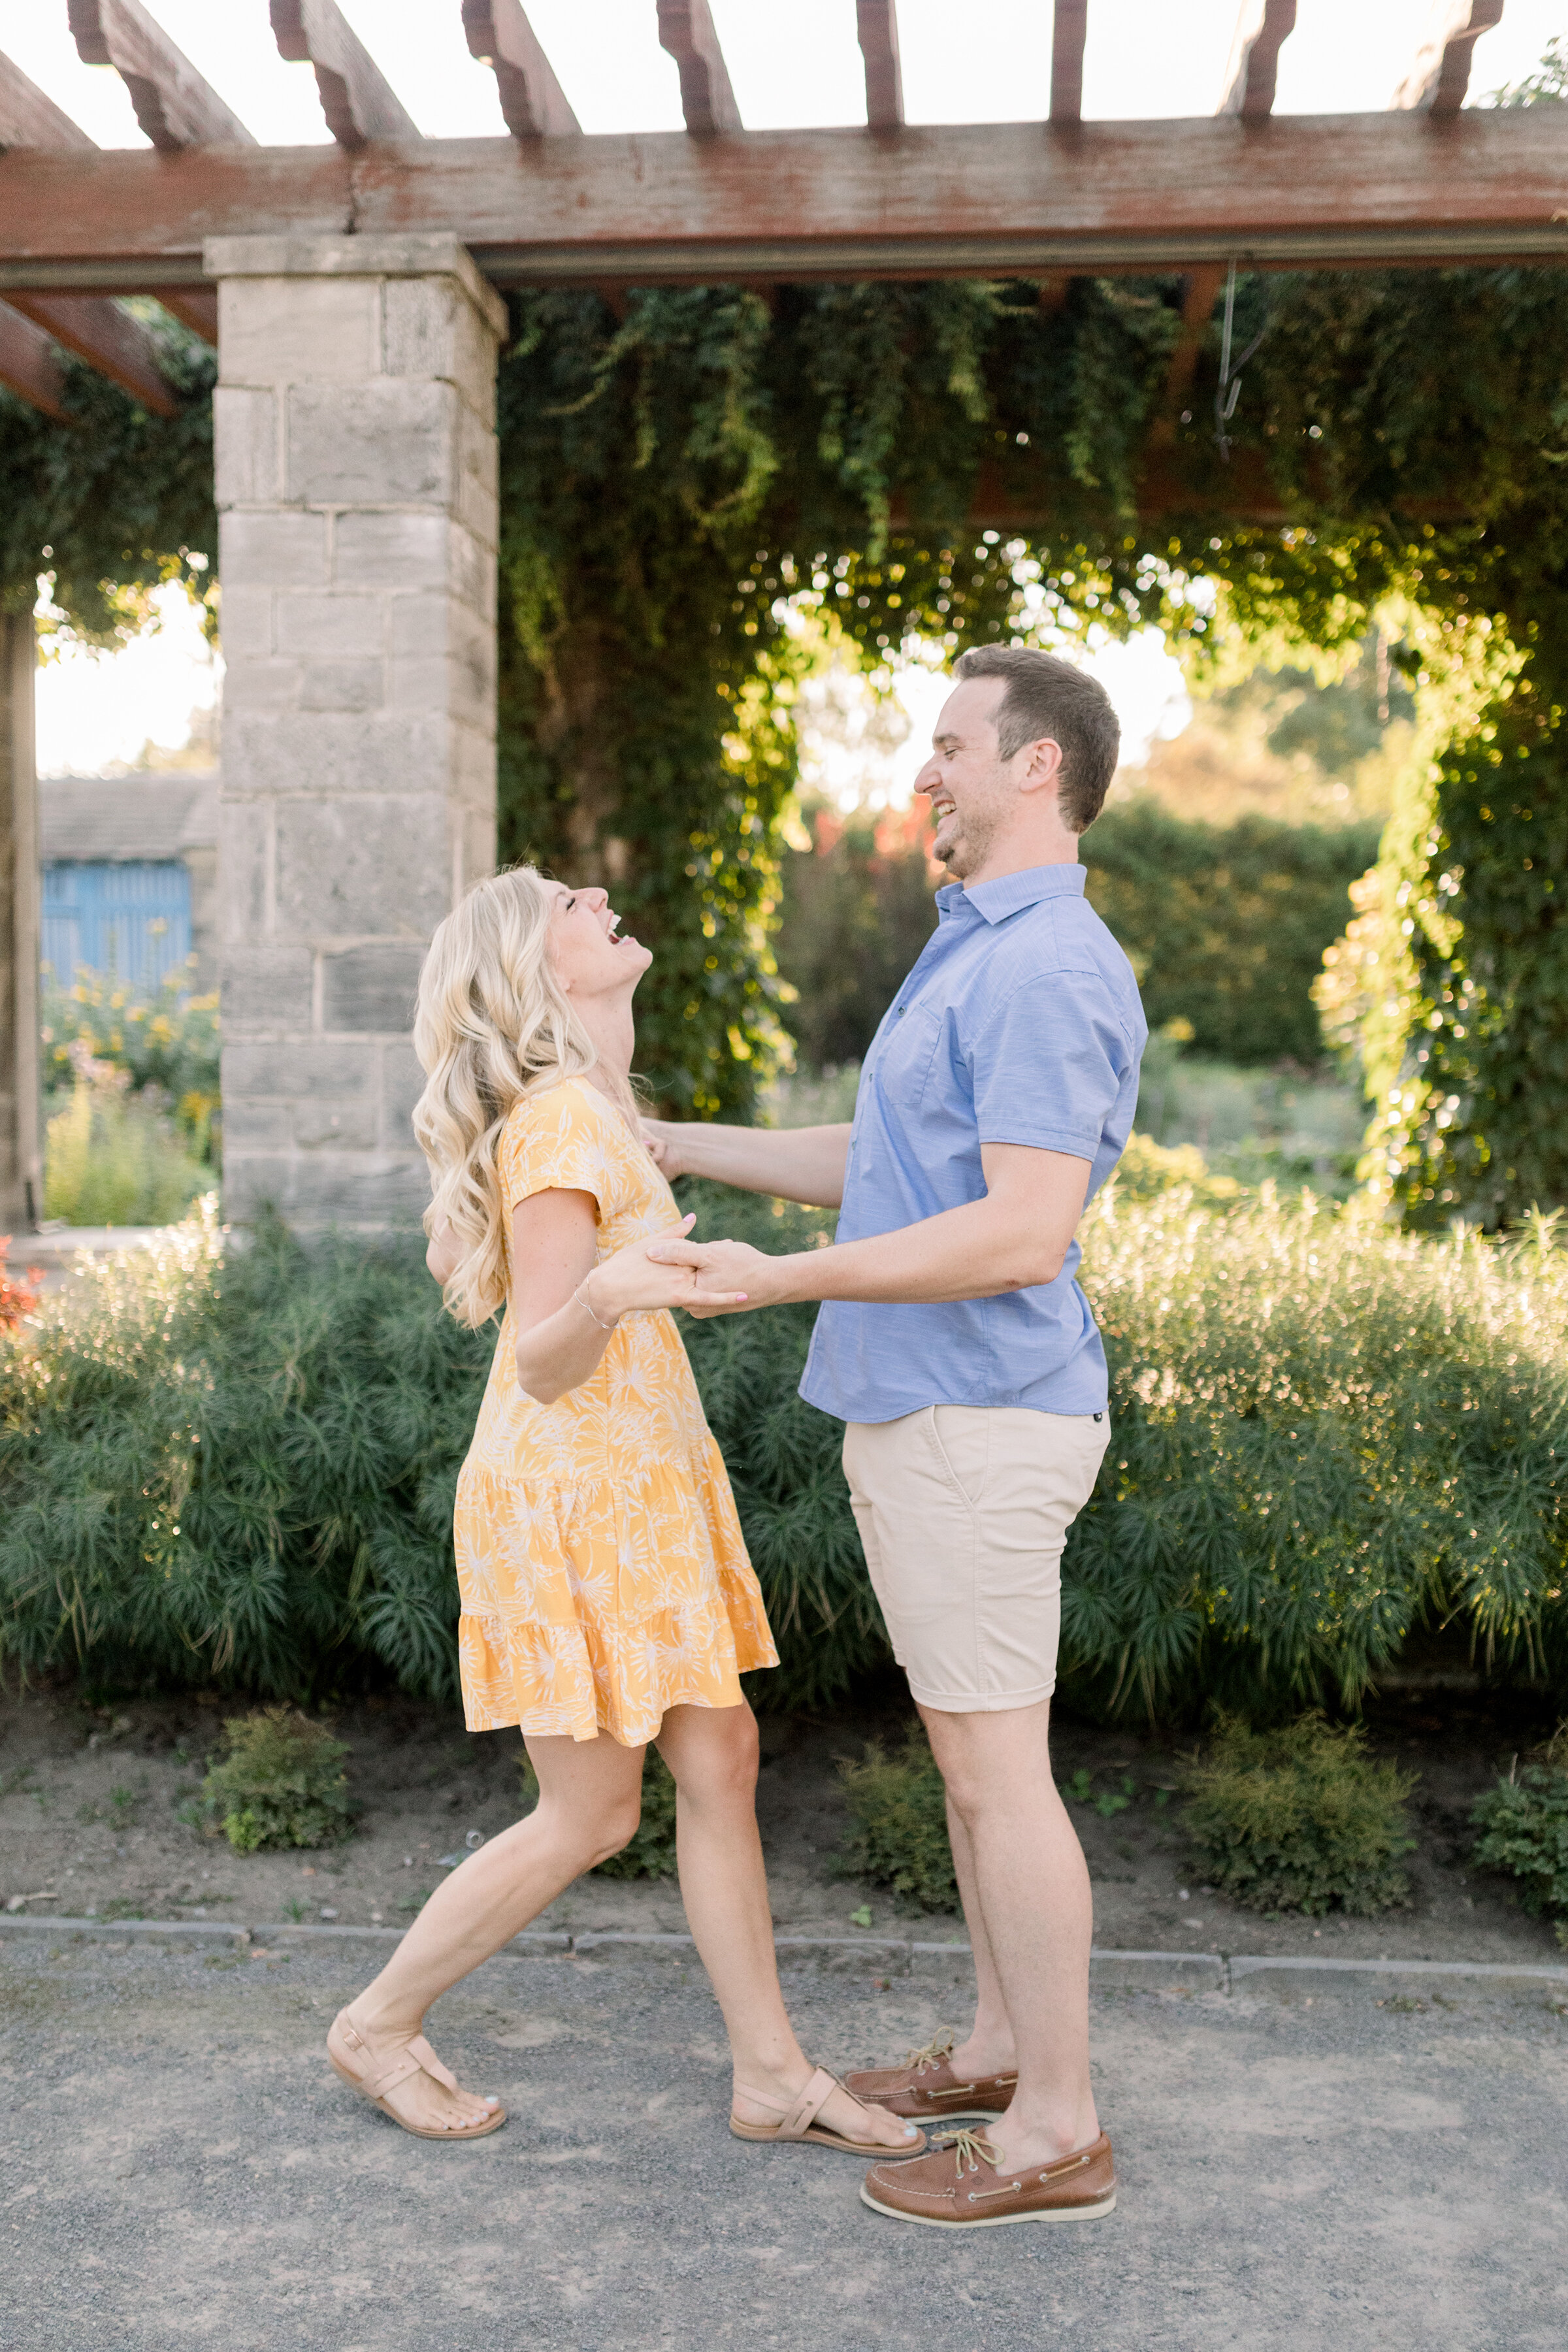  A gorgeous couple laugh together under a beautiful terrace in engagement styled photo shoot by Chelsea Mason Photography. Engagement session inspiration ideas and goals client attire inspiration for women  couple goals engagement location inspiratio